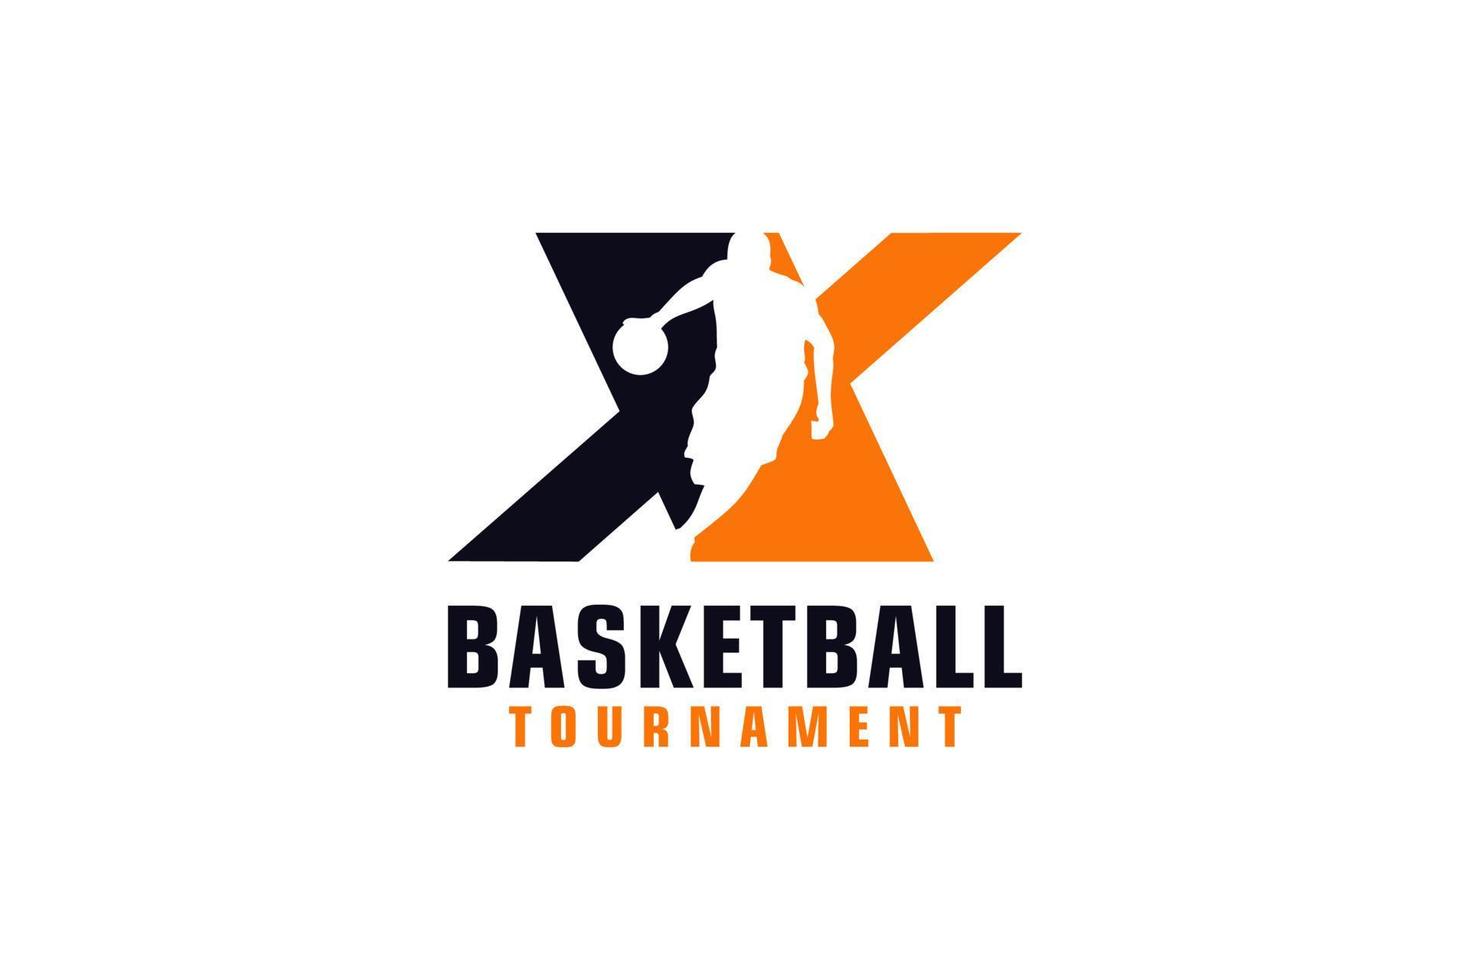 Letter X with Basketball Logo Design. Vector Design Template Elements for Sport Team or Corporate Identity.